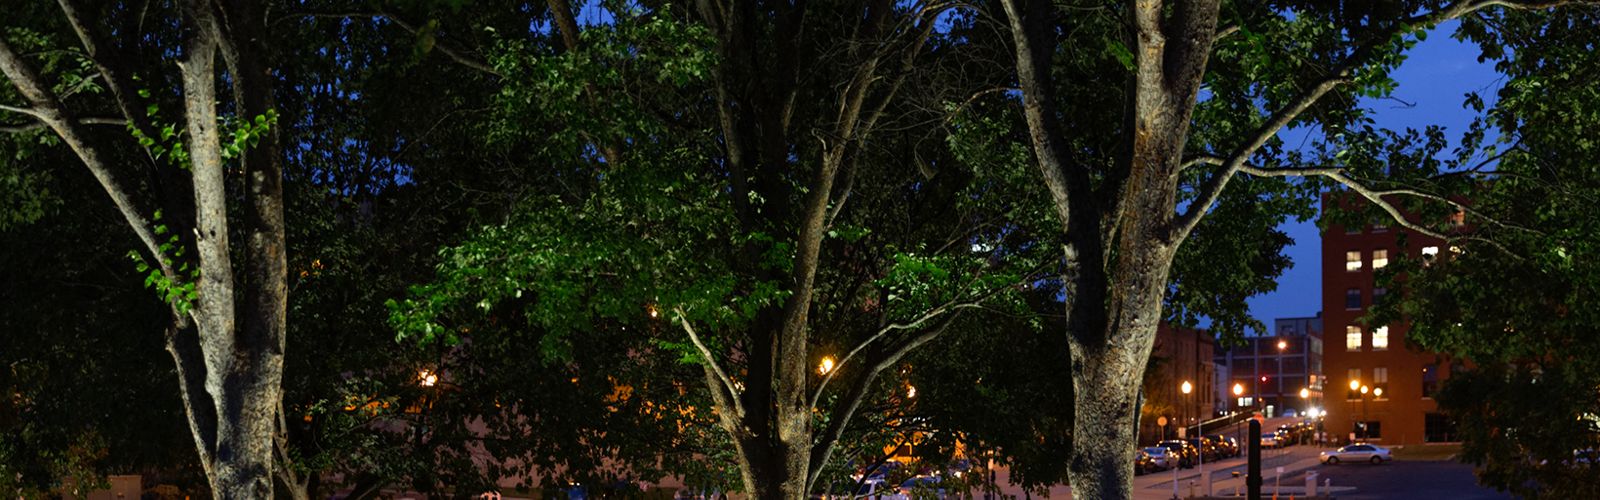 The city at night. Trees in the foreground with a city street in the background brightened by street lights. .